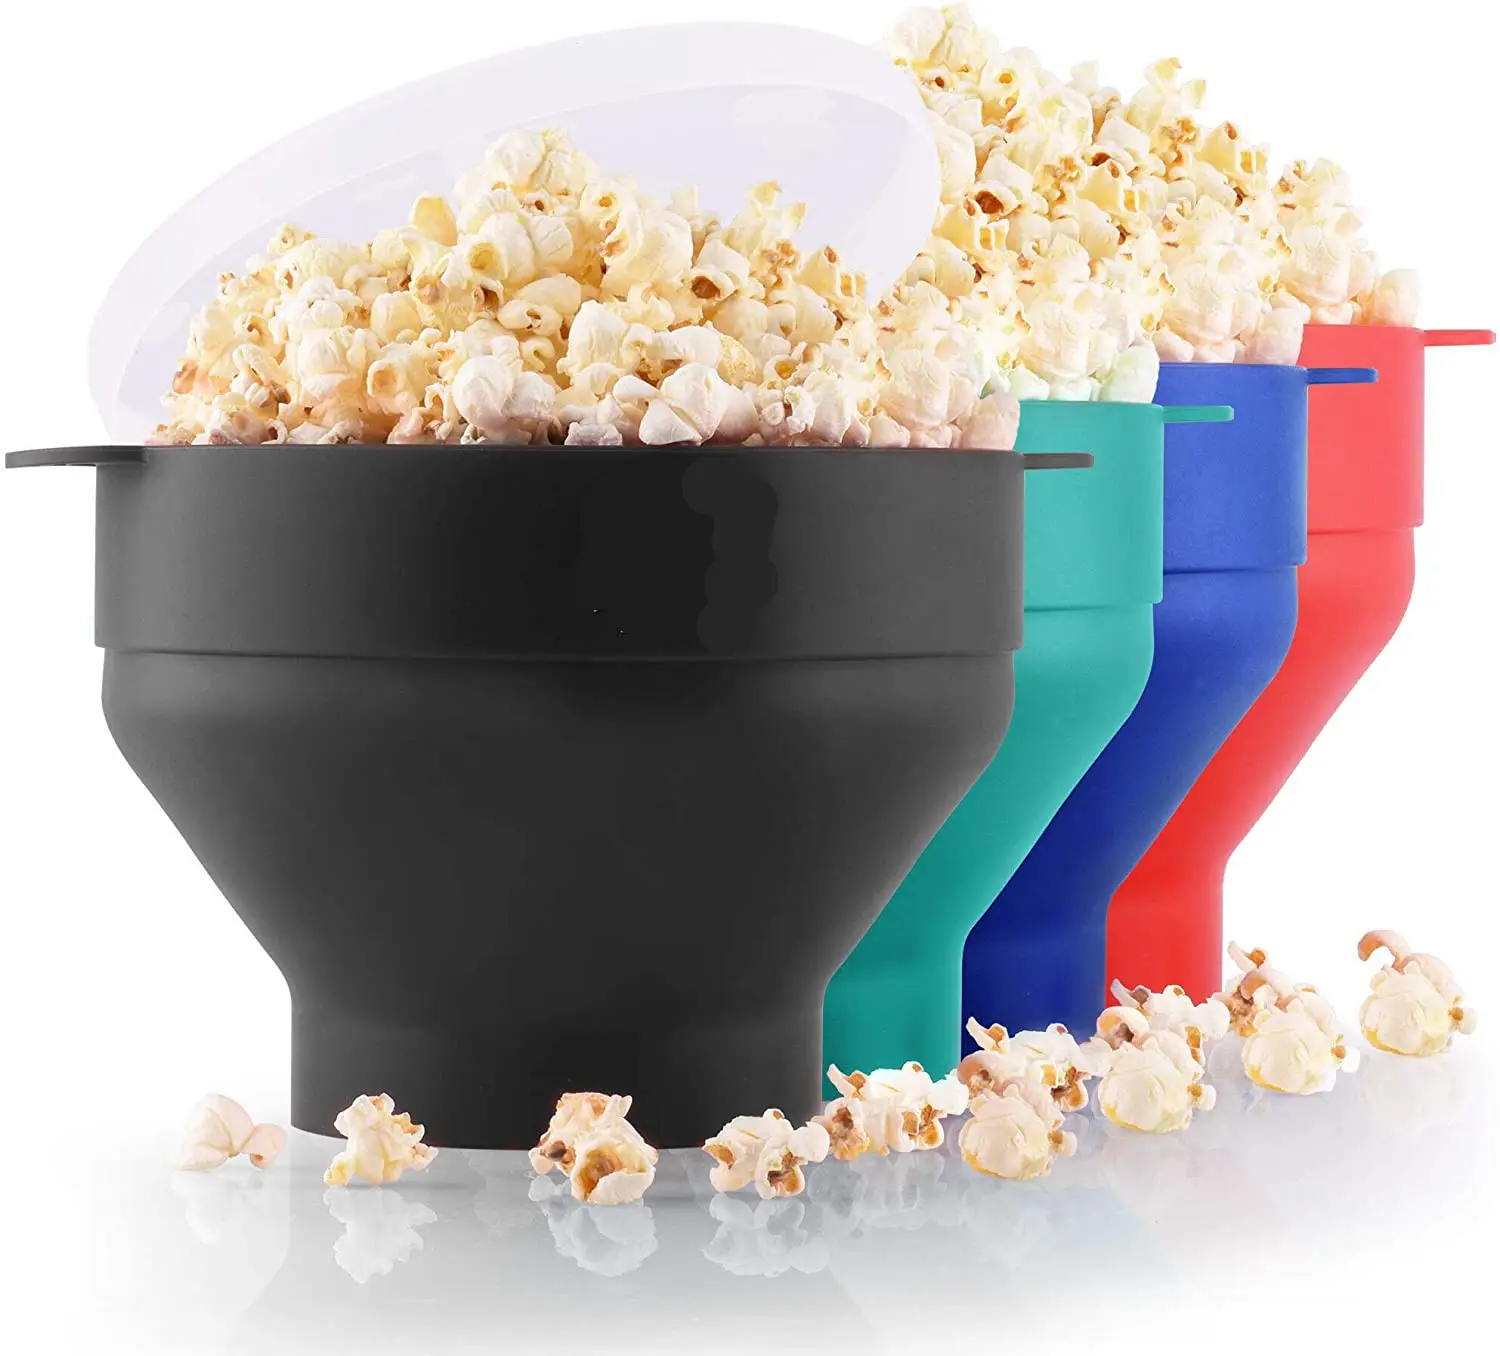 290g Large Capacity 2.95L Microwave Popcorn Popper Serving Bowl Silicone Hot Air Popcorn Maker Collapsible Bowl